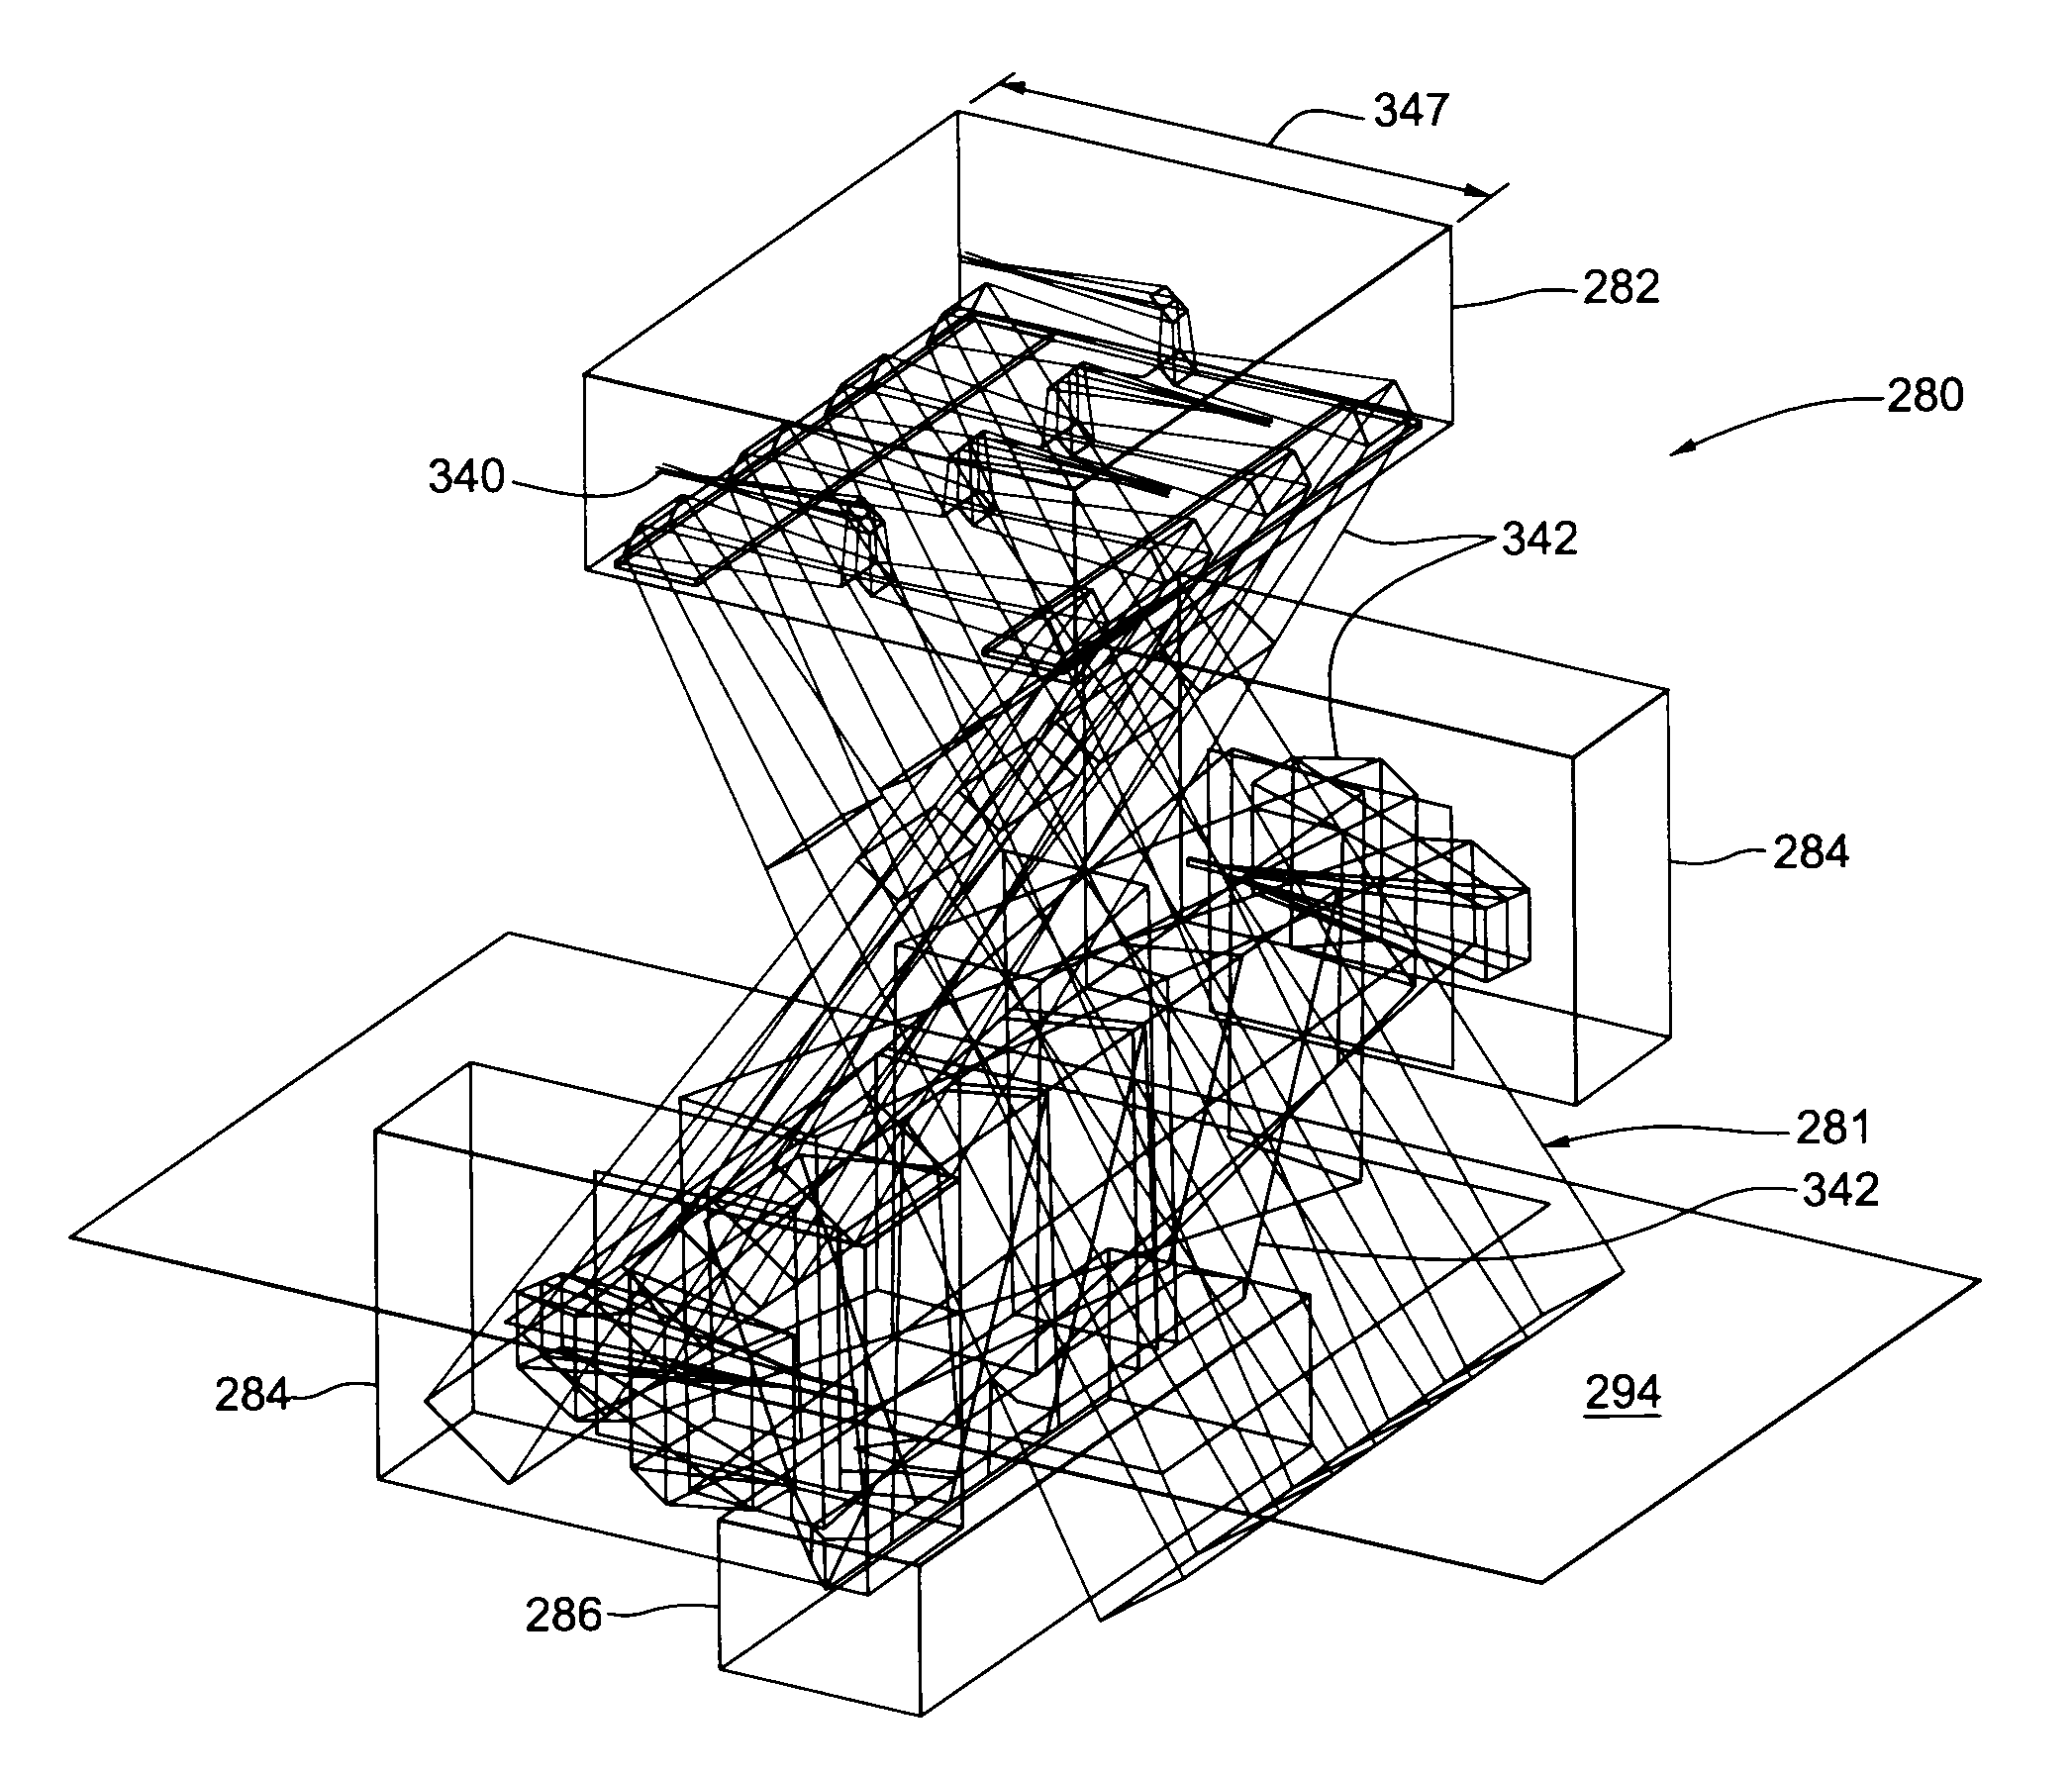 Image-based code reader for acquisition of multiple views of an object and methods for employing same